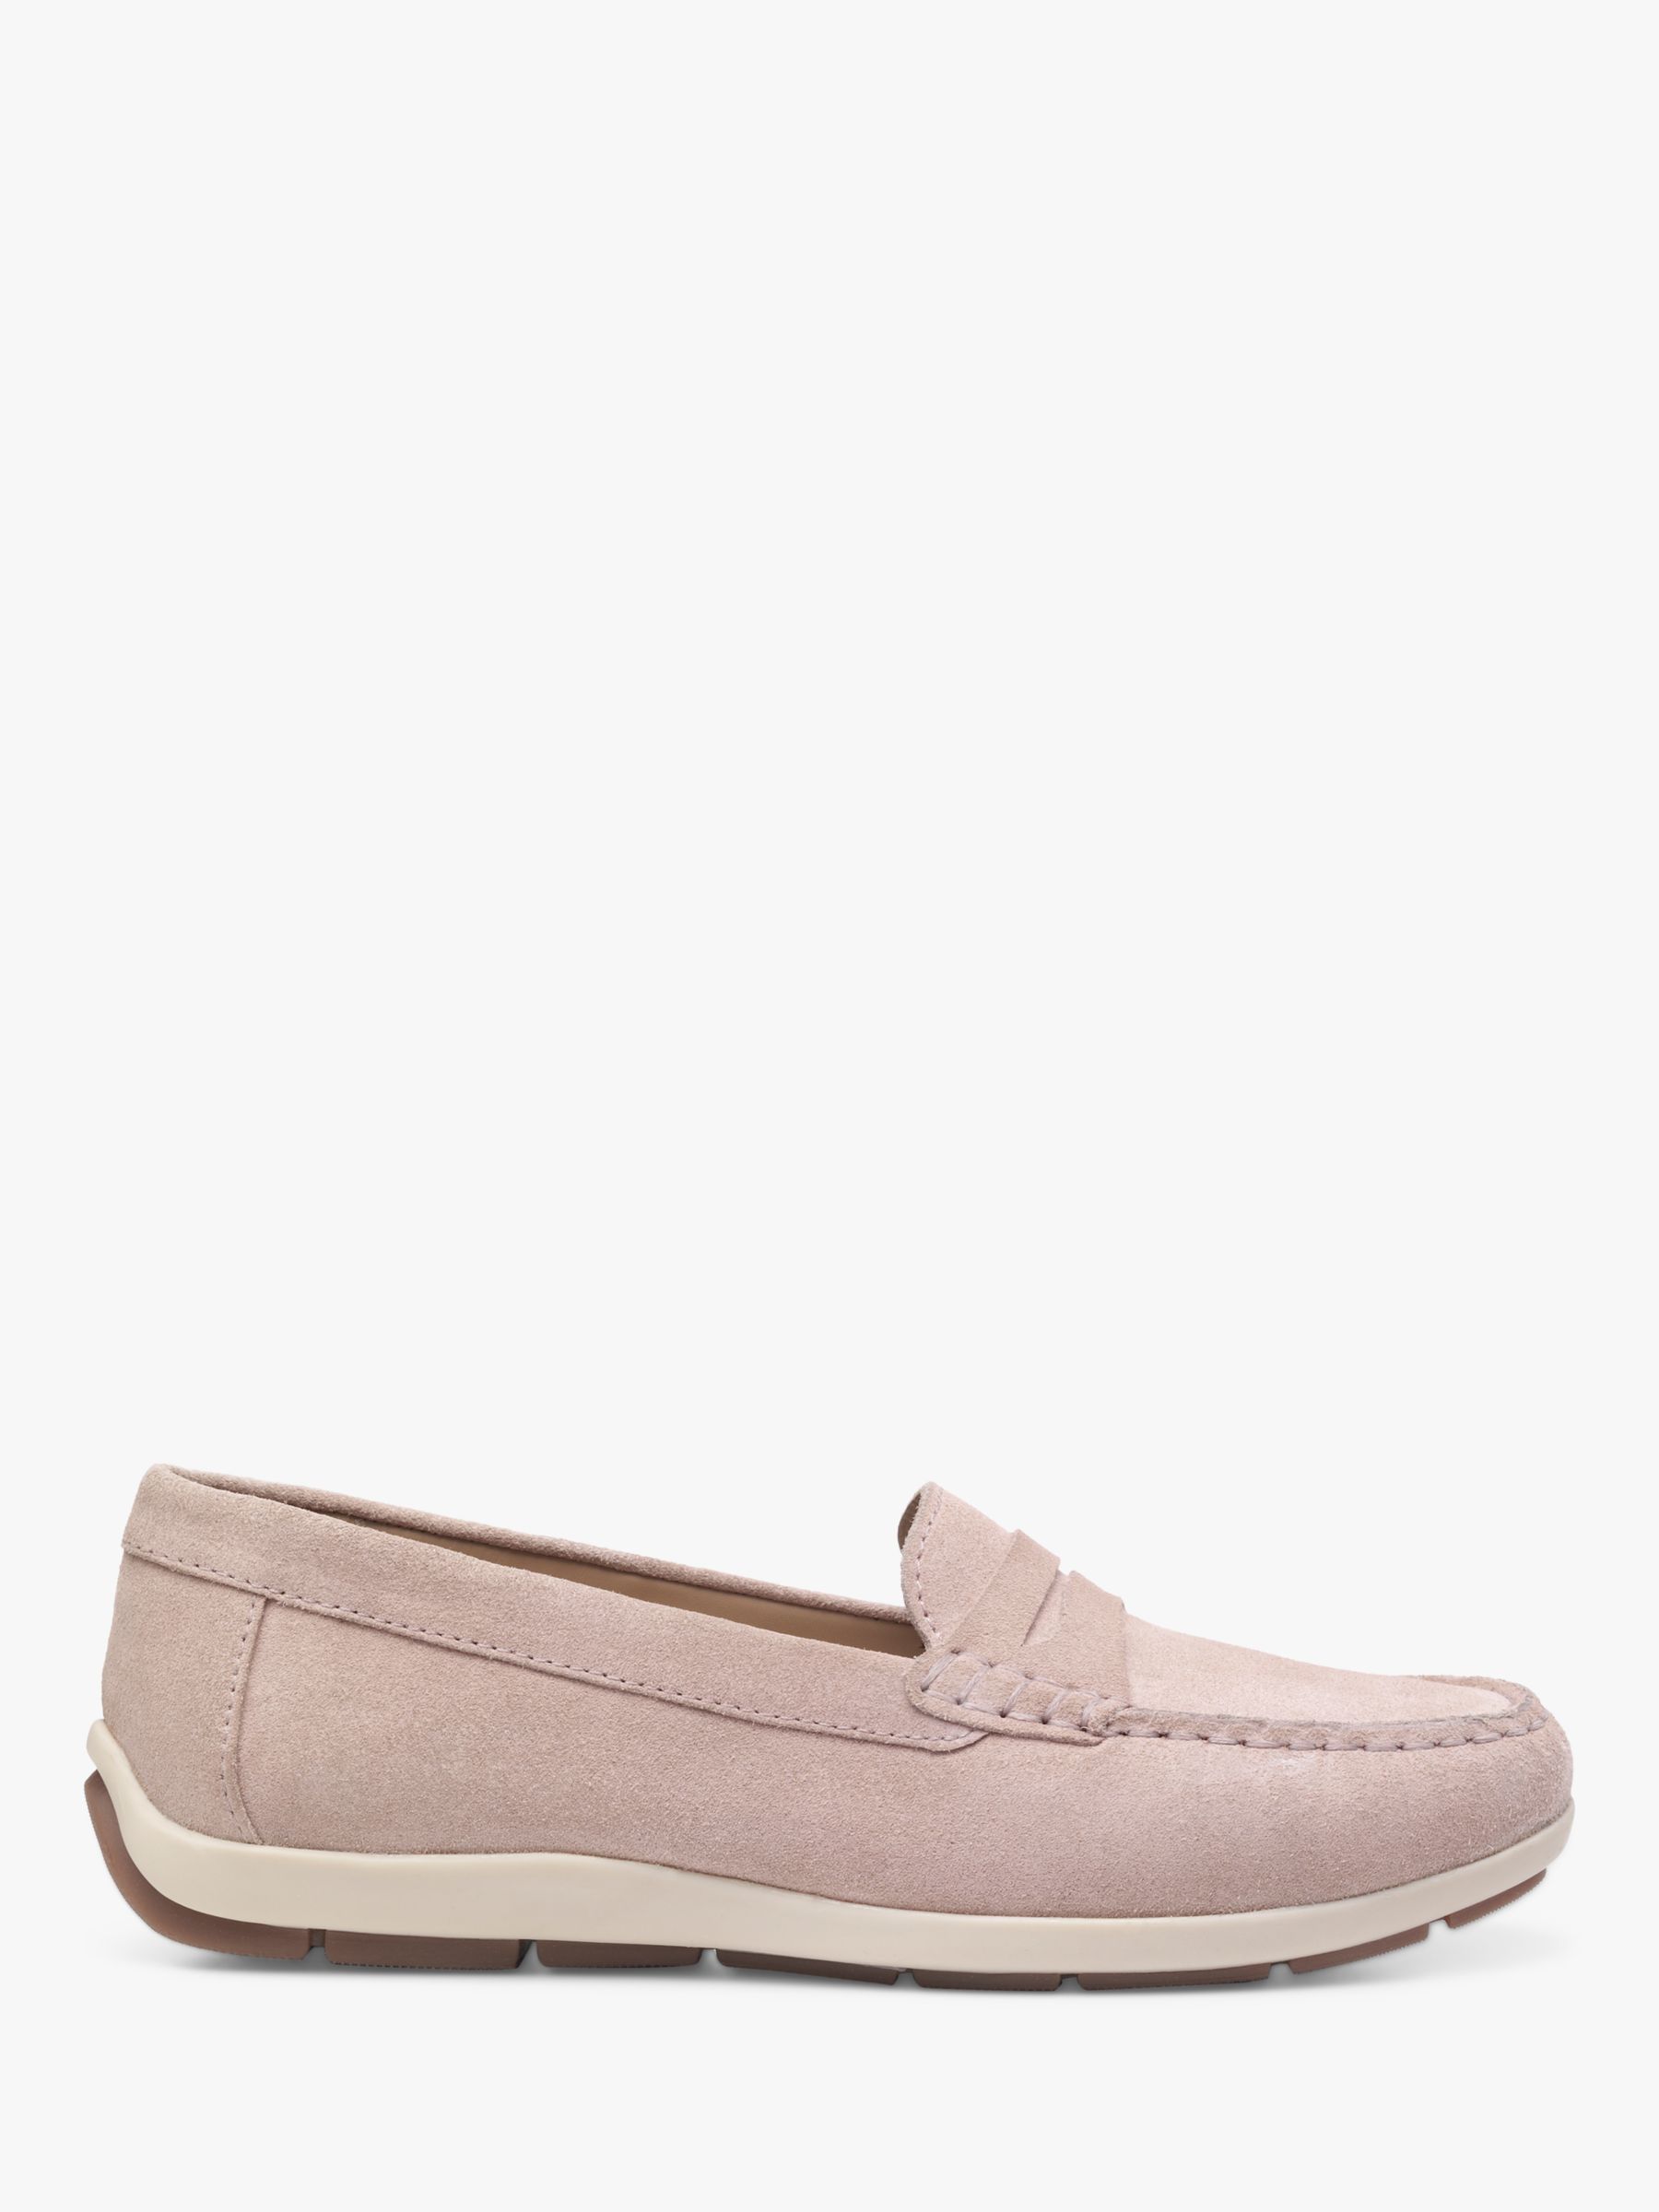 Pier Loafers, Blush at John Lewis Partners